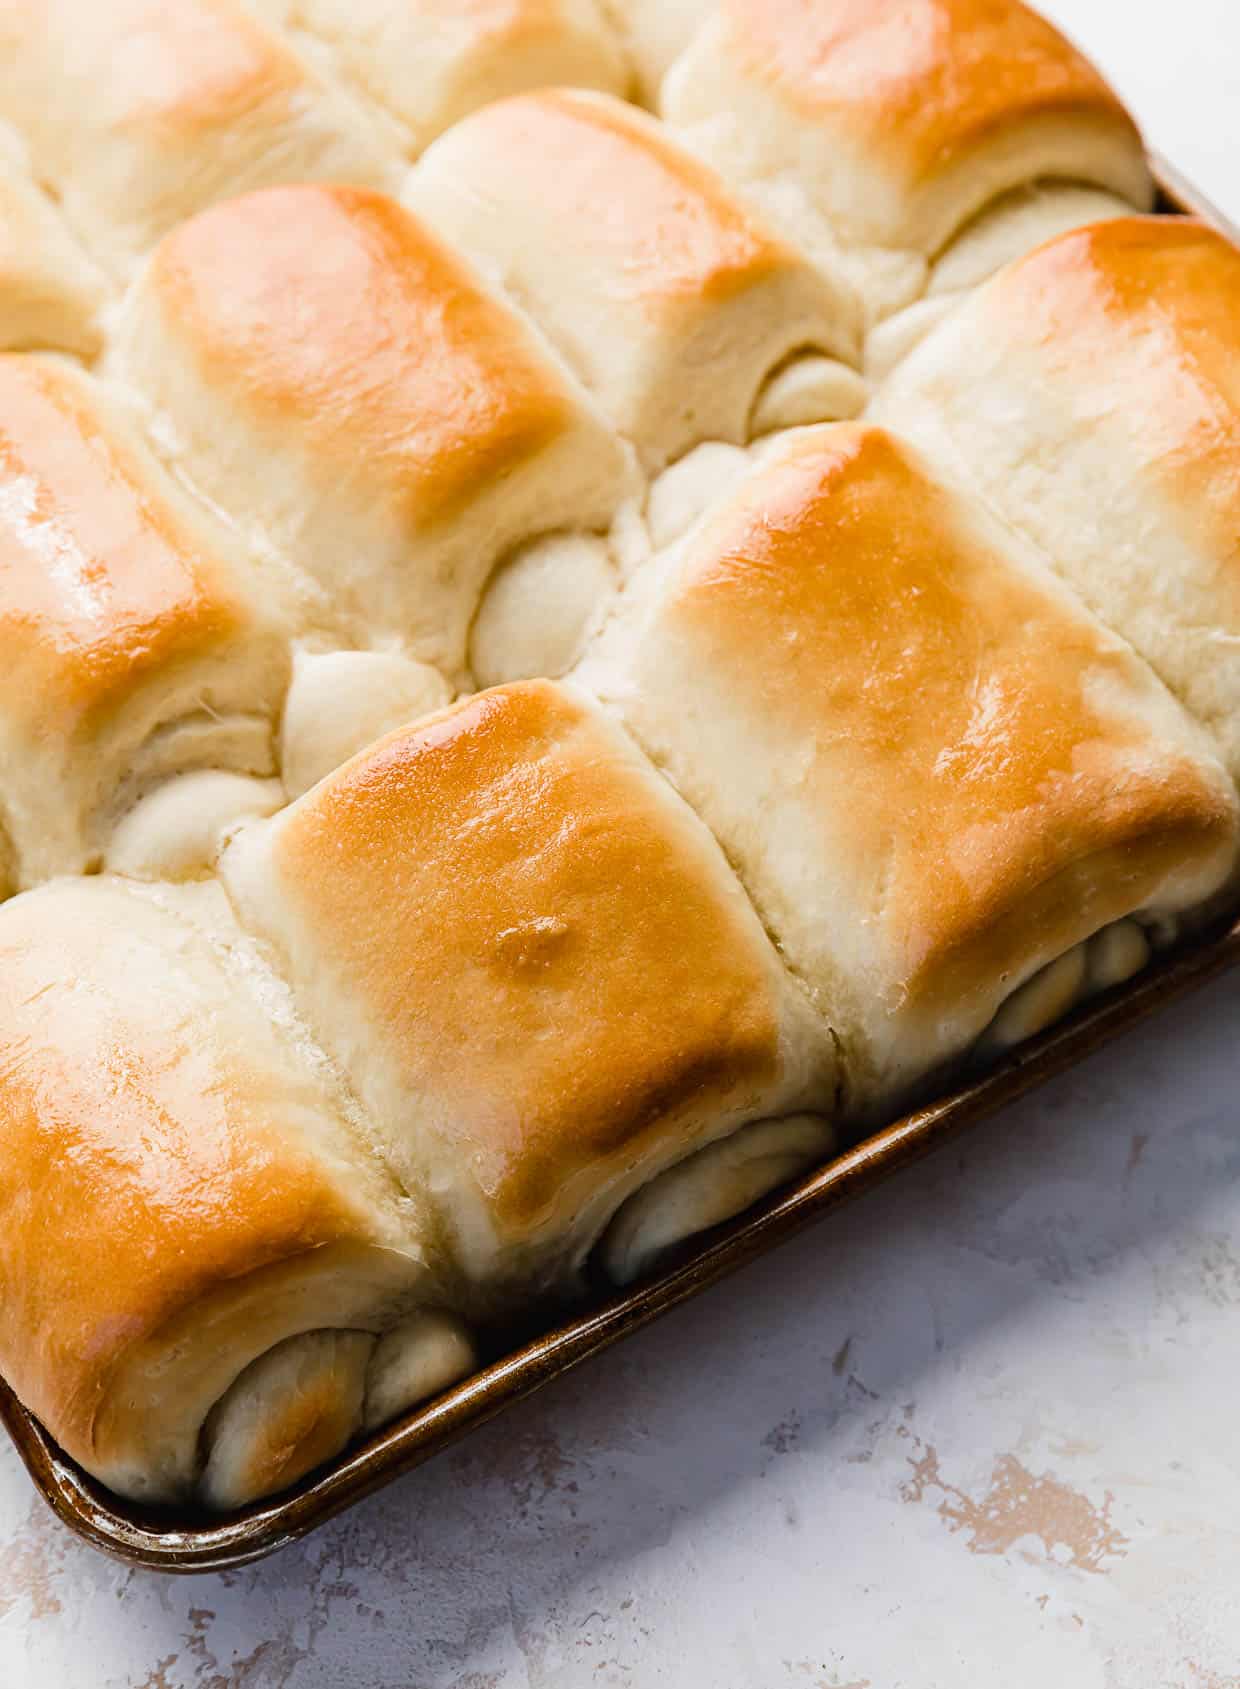 Easy Lion House Rolls that are golden in color, lined up on a baking sheet.